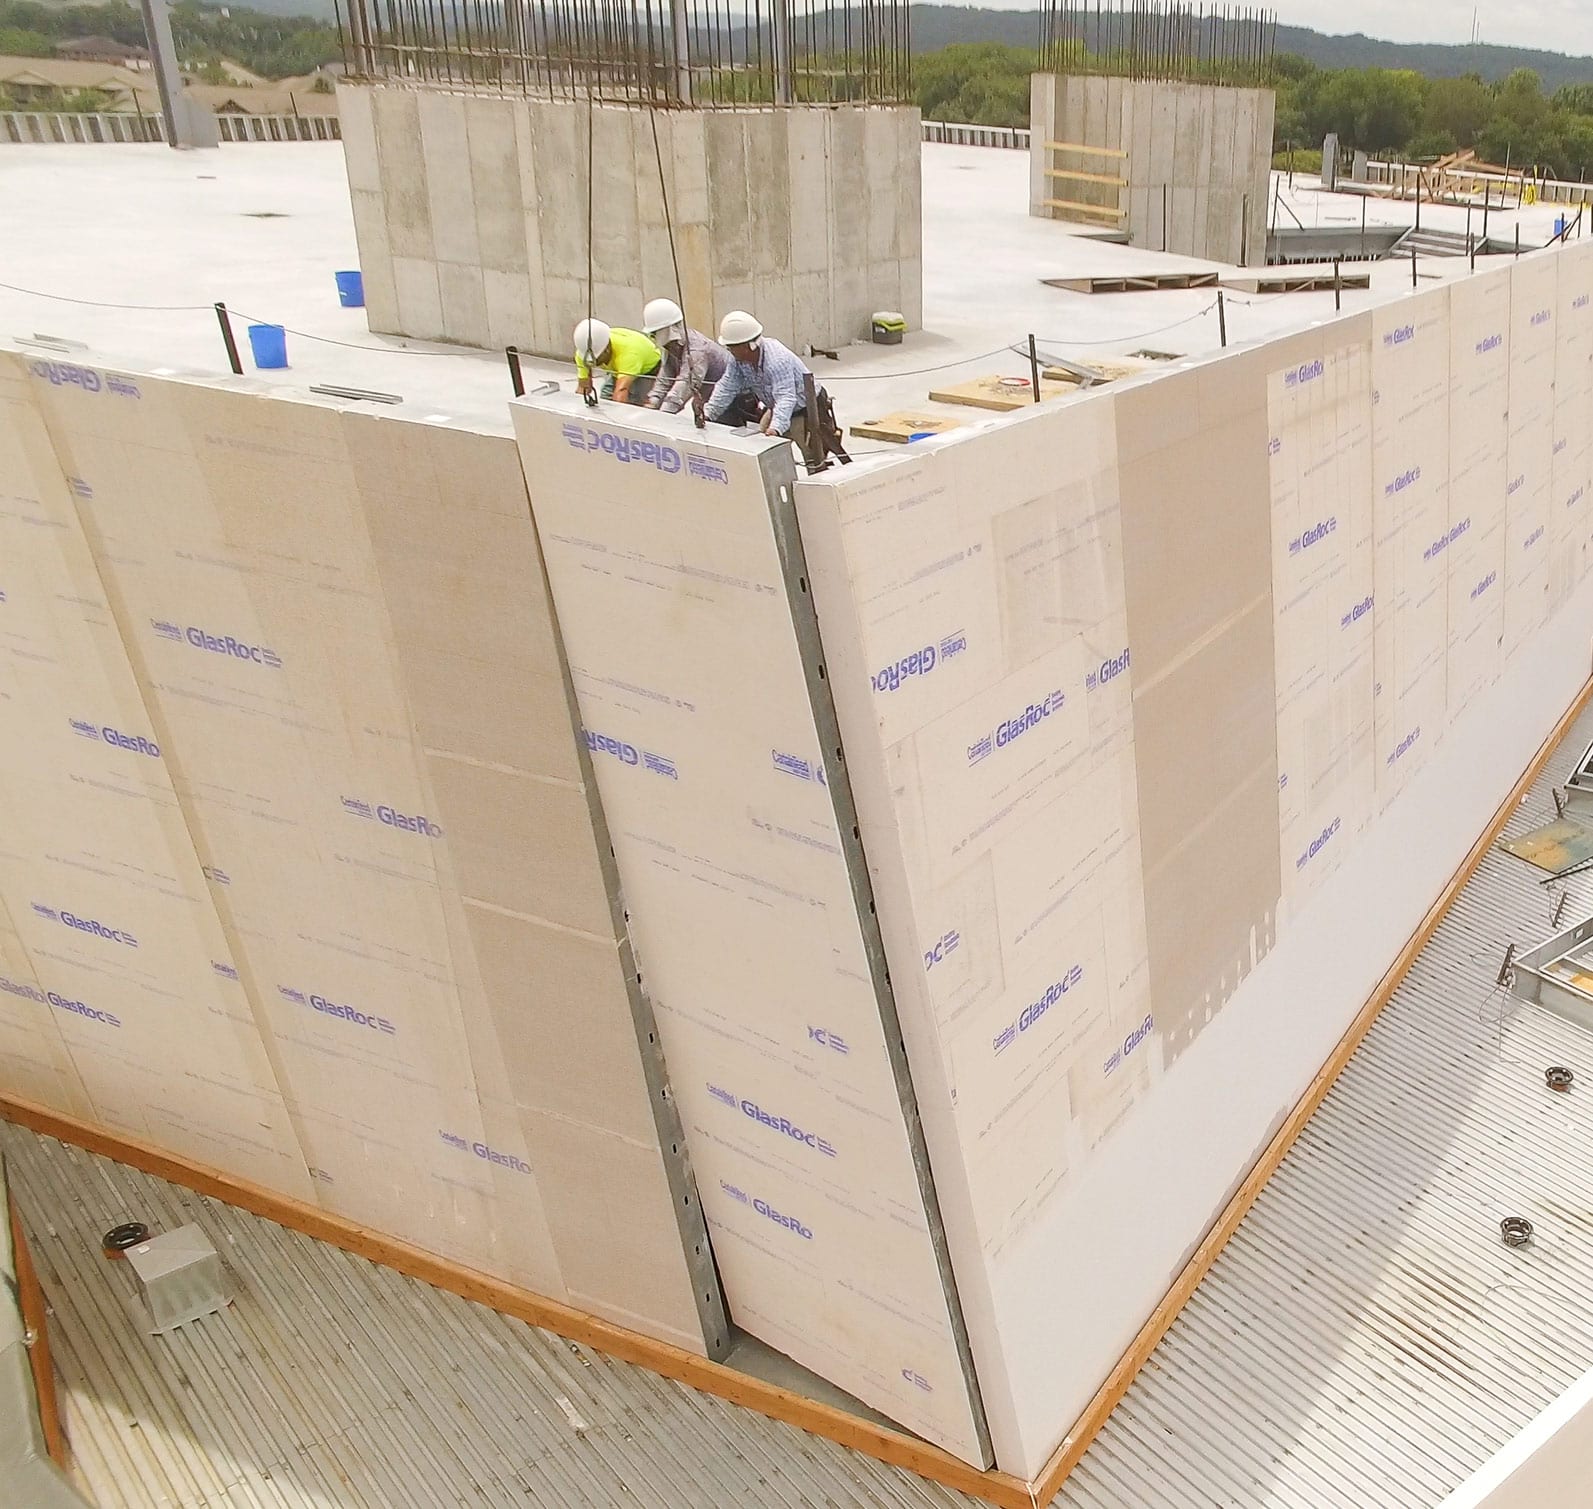 EPI construction workers install prefabricated metal panels